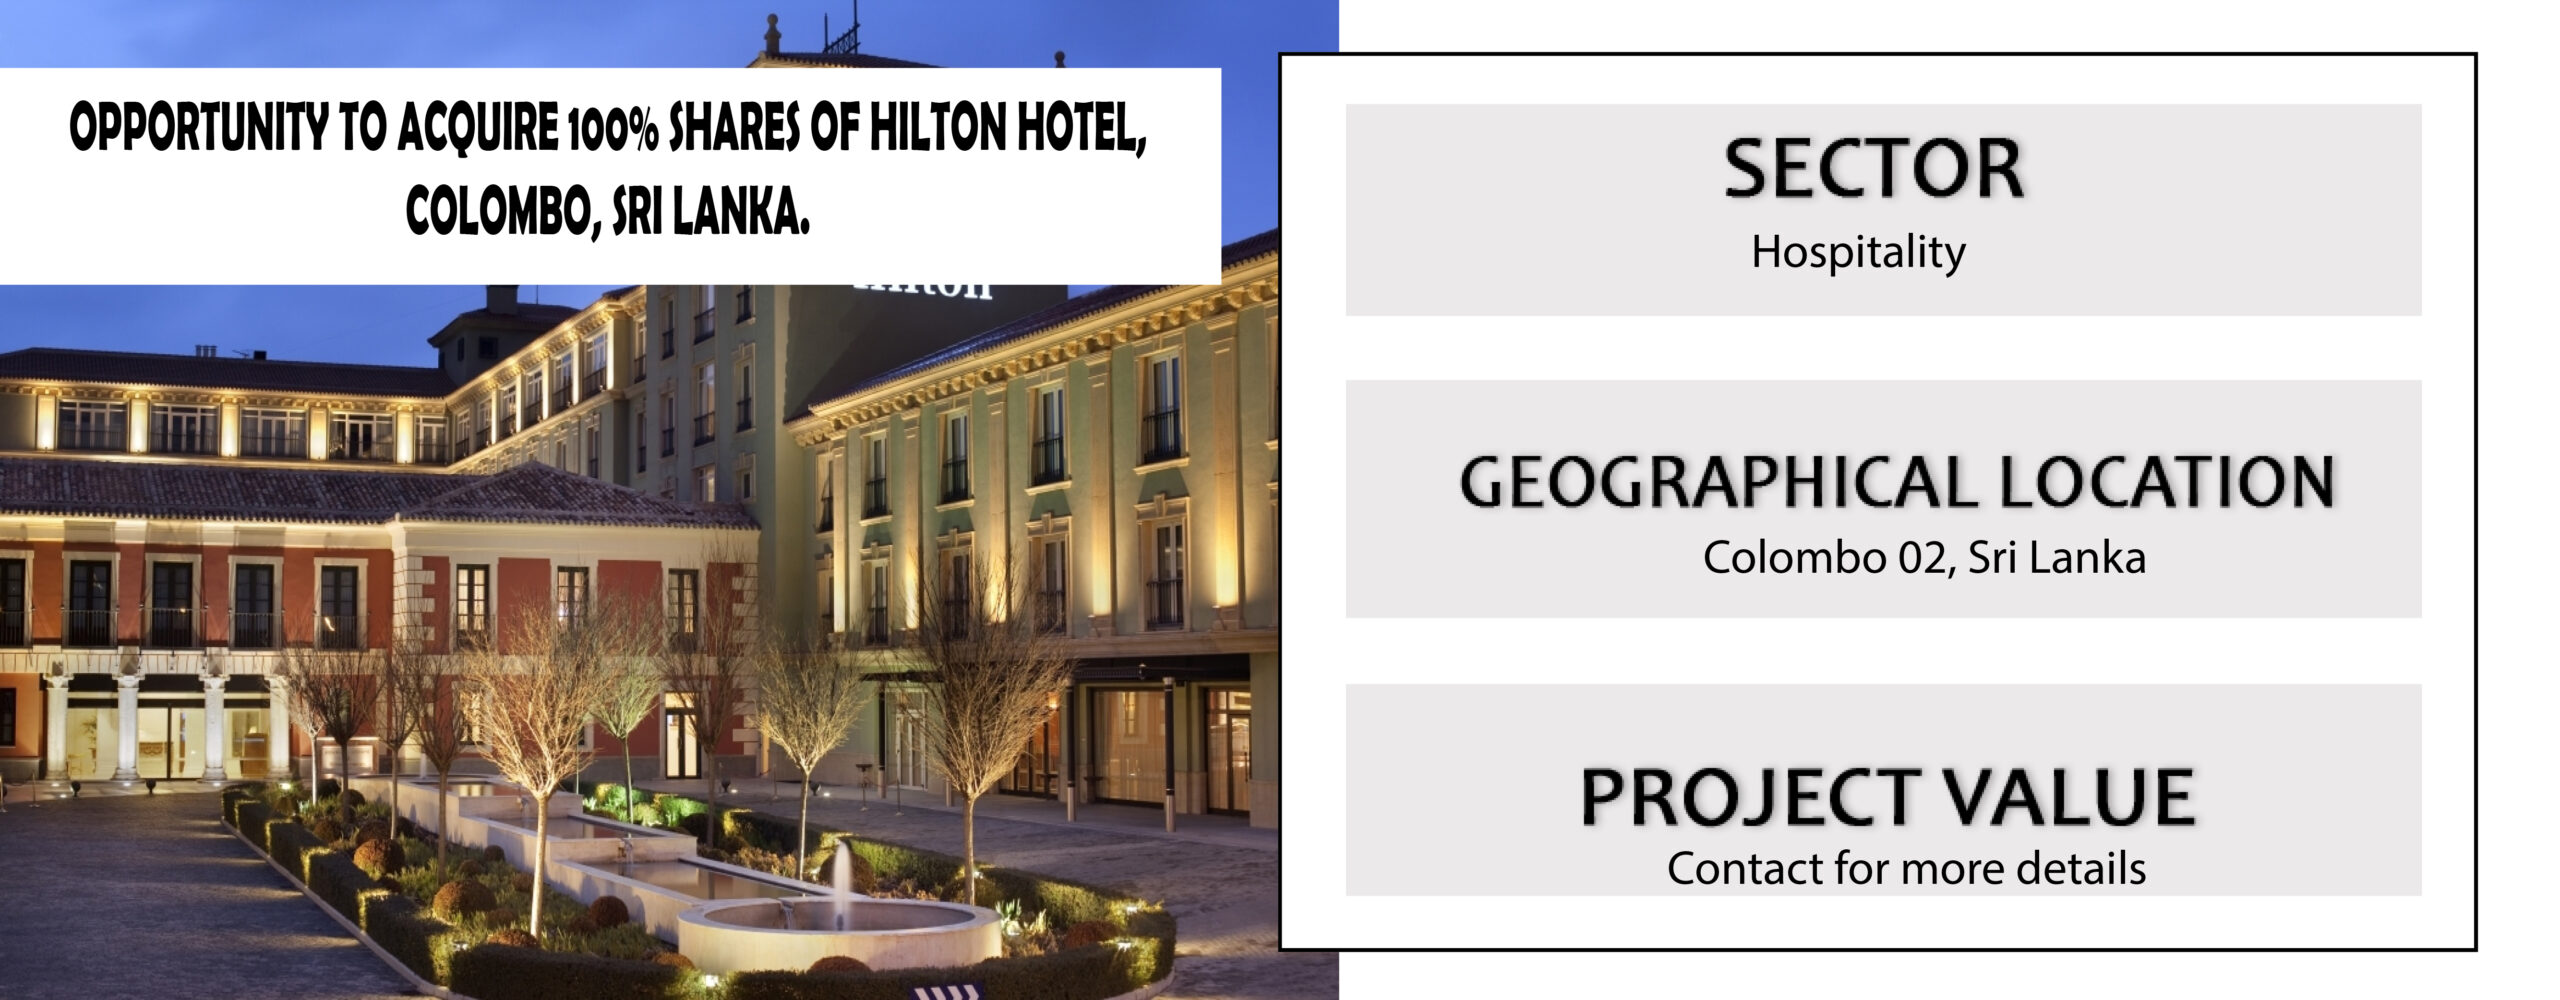 OPPORTUNITY TO ACQUIRE 100% SHARES OF HILTON HOTEL, COLOMBO